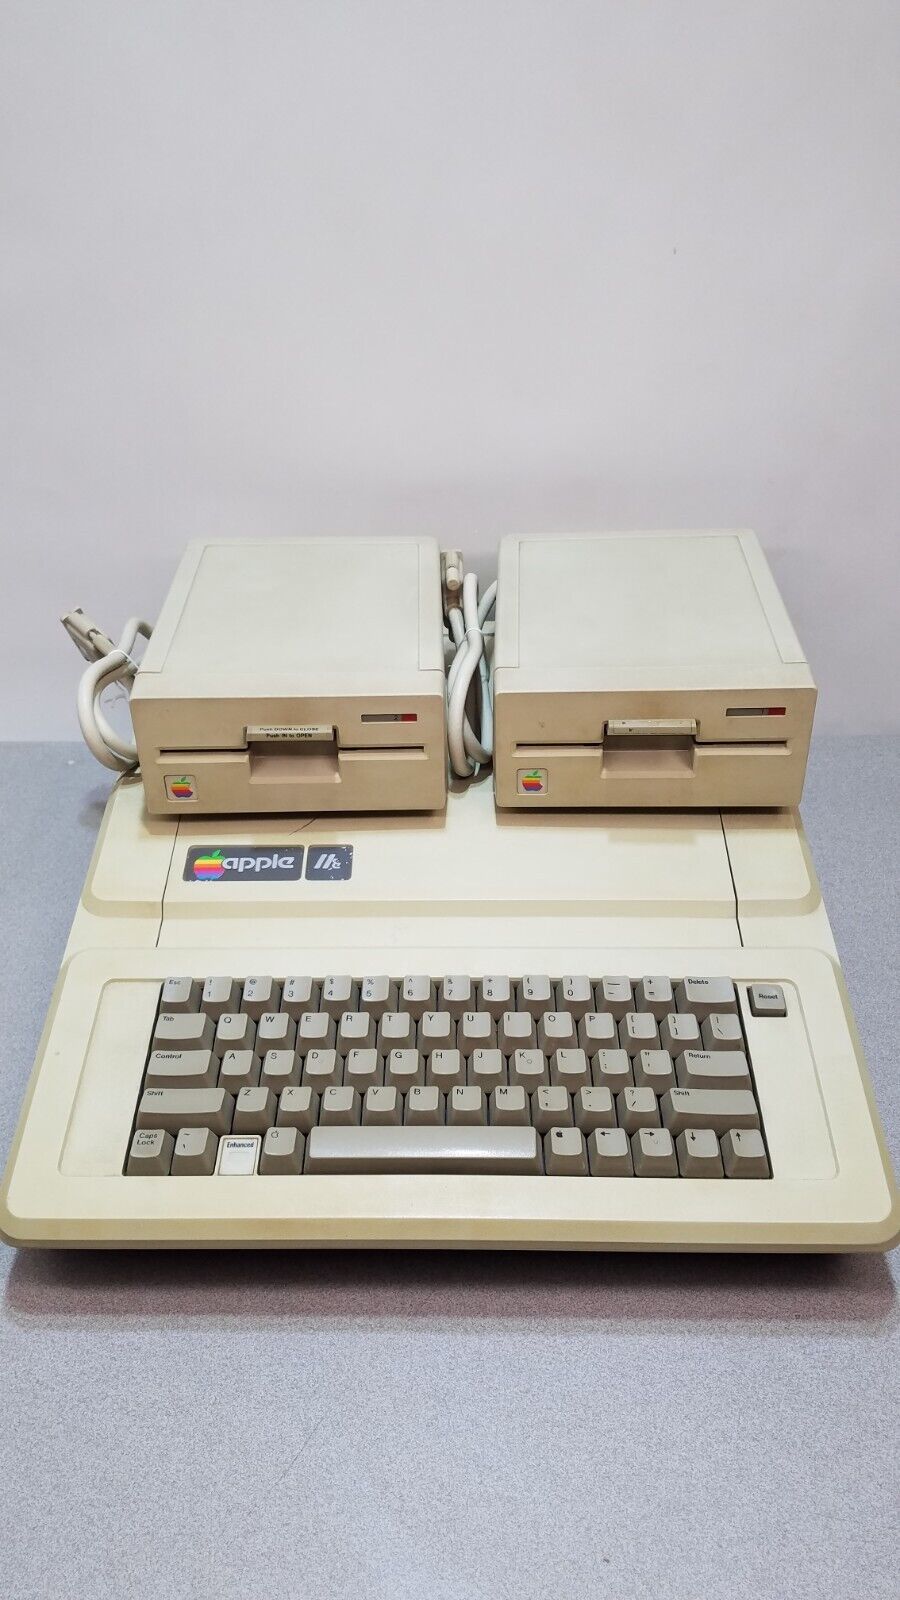 Vintage Apple IIe A2S2064 Computer w/ 2 A9M0104 Floppy Drives - Passes self test